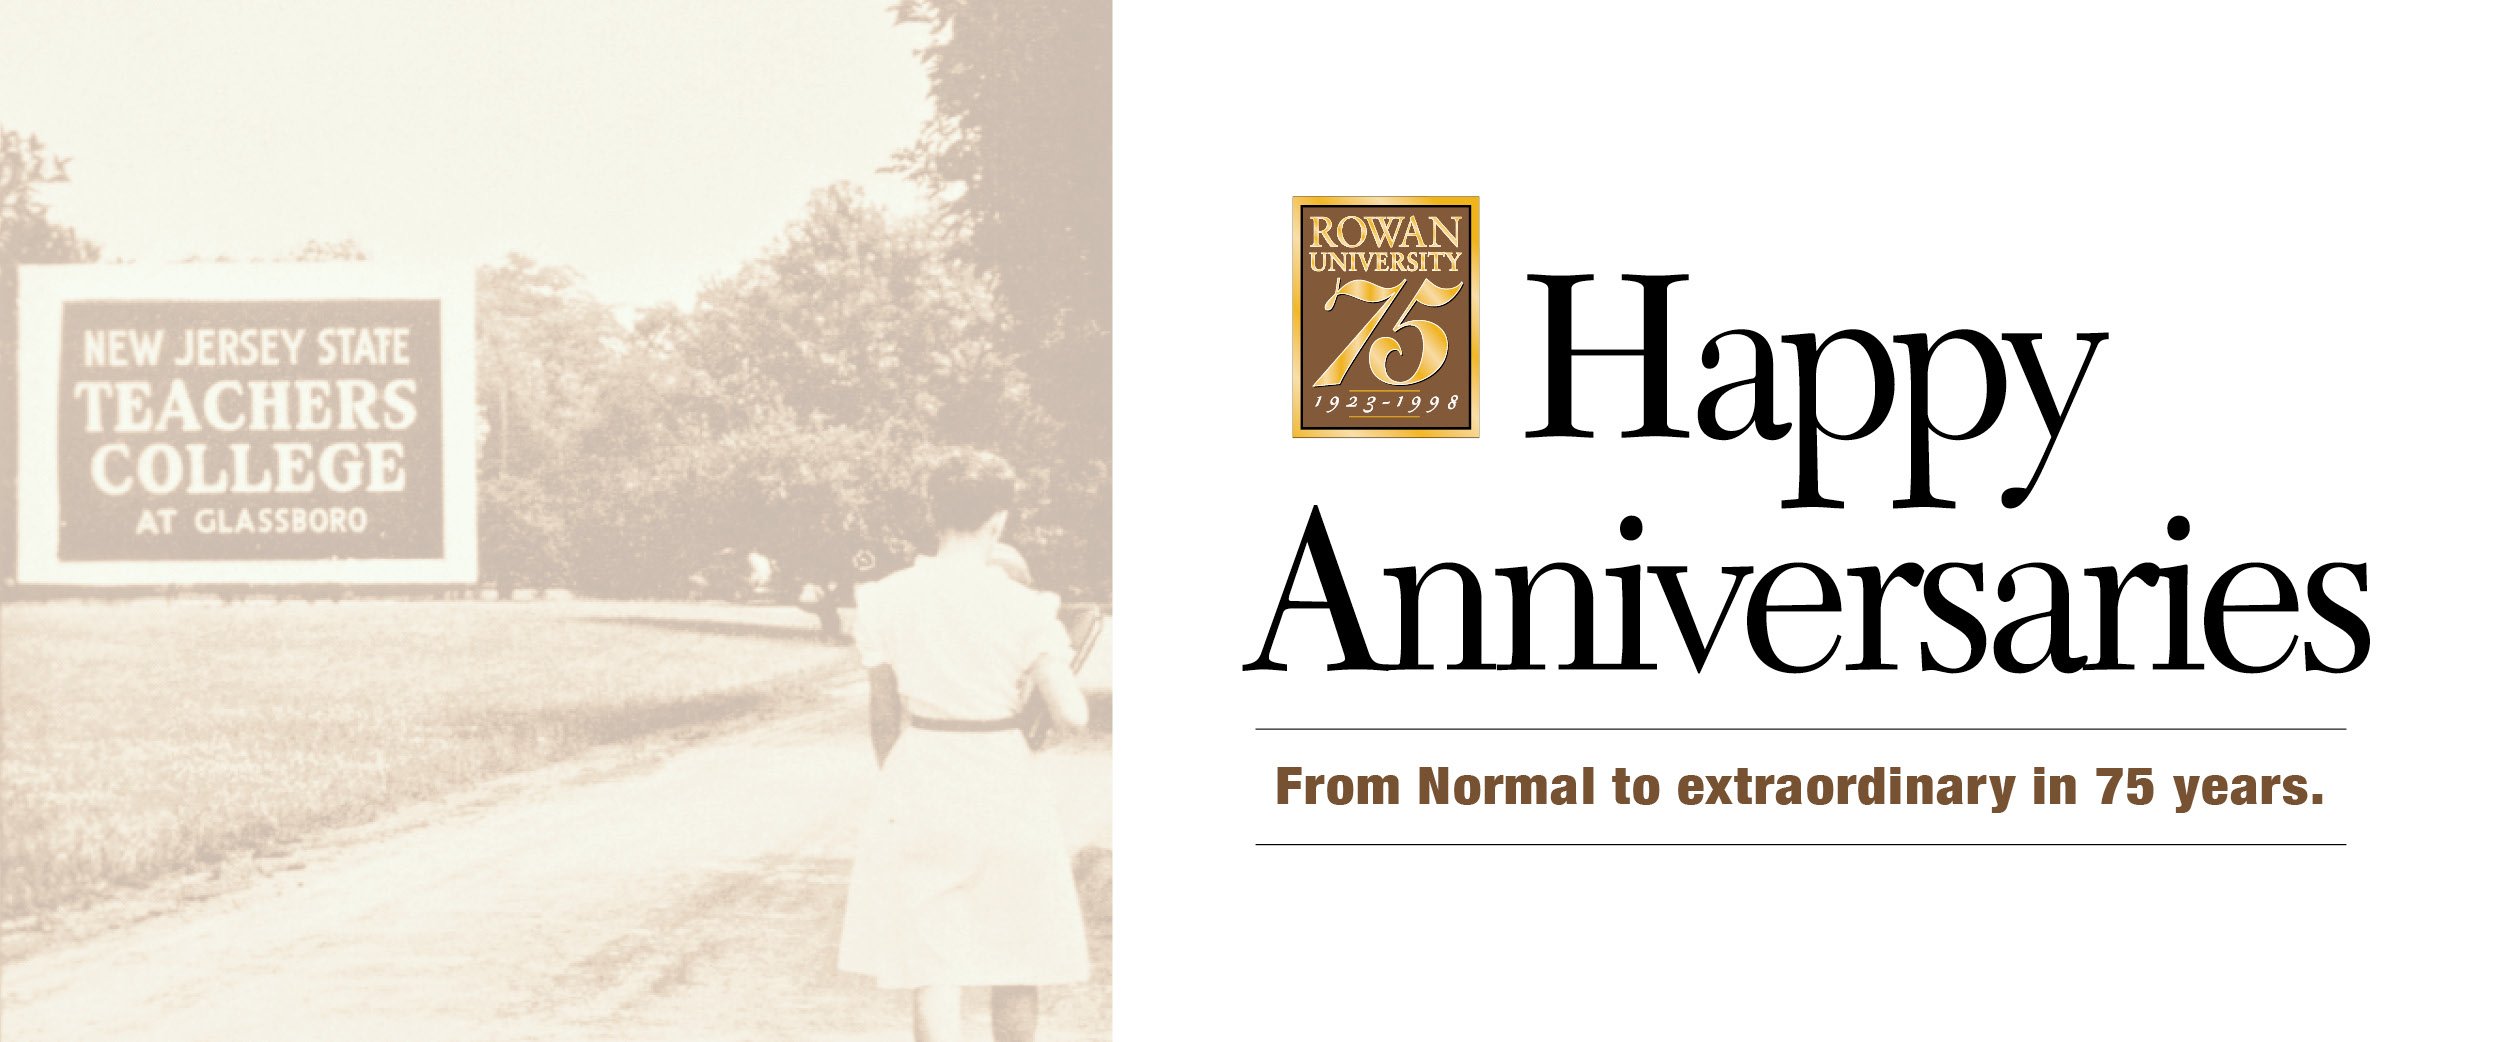 Happy anniversaries: From Normal to extraordinary in 75 years